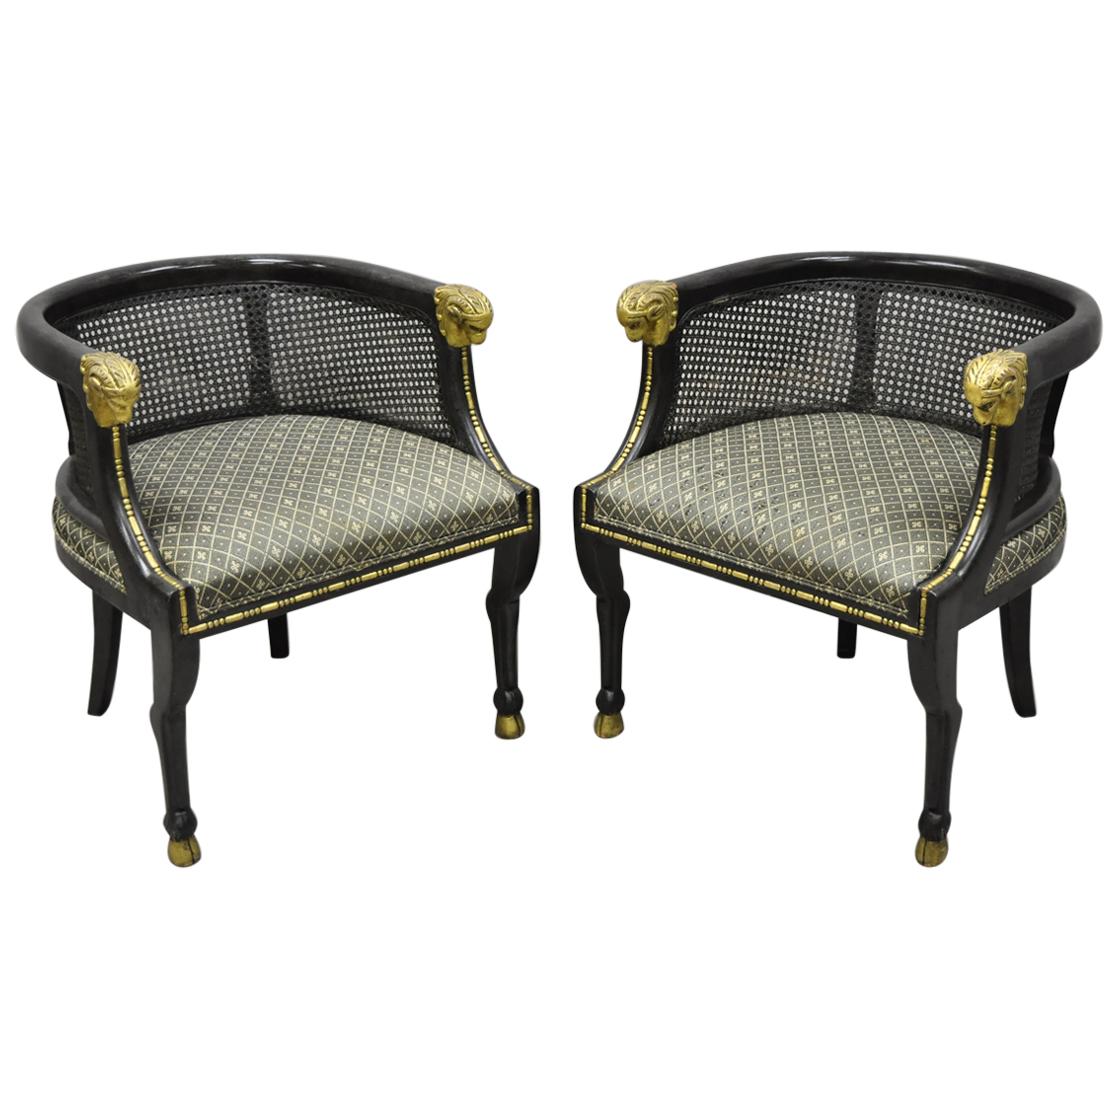 Pair of Cane Barrel Back Ram's Head Black and Gold Club Lounge Chairs